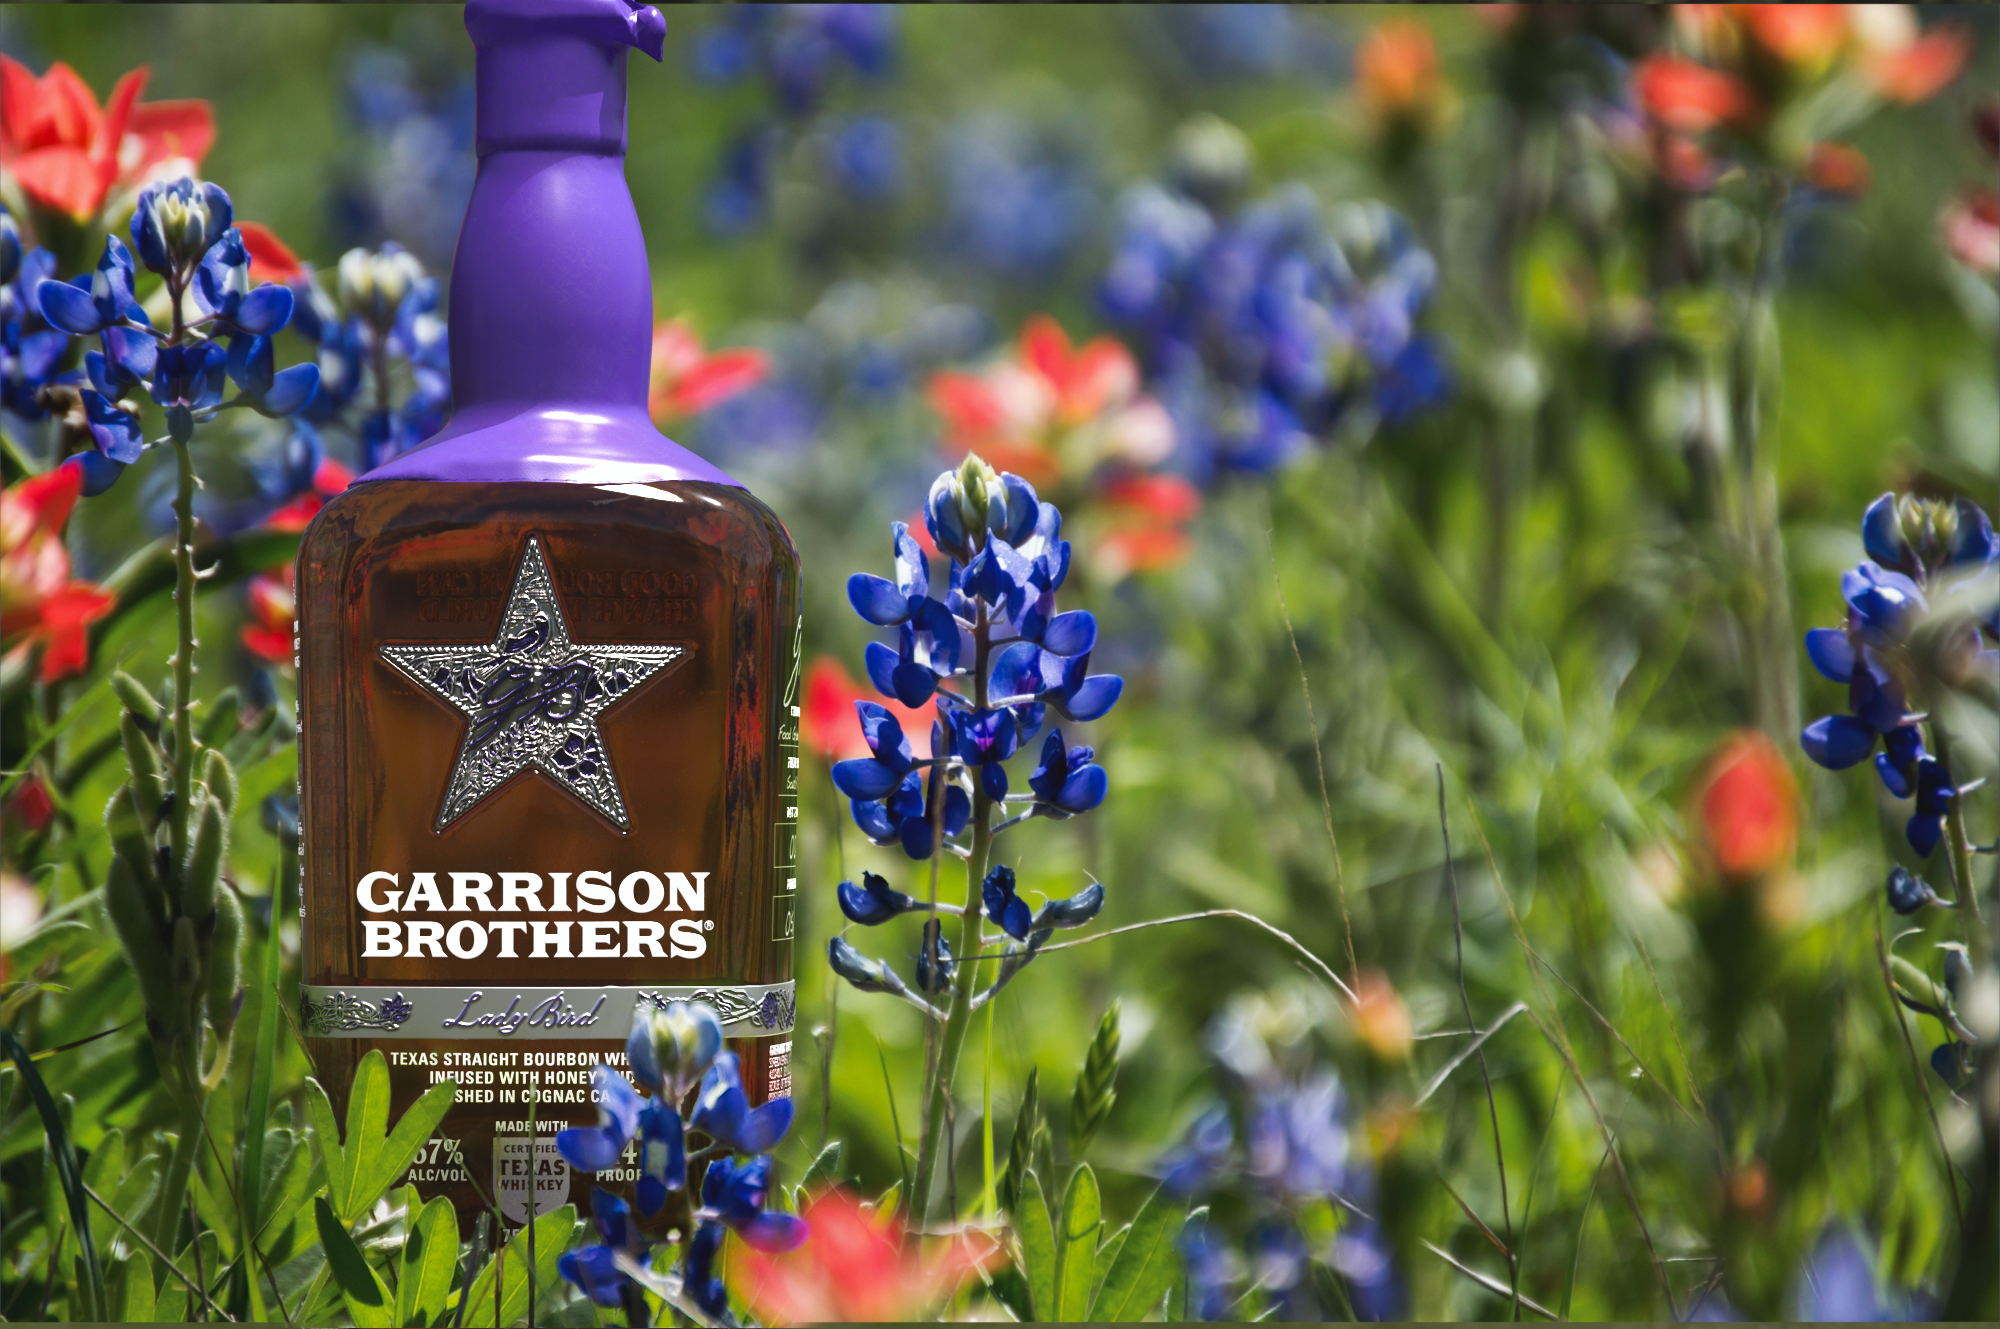 Lady Bird Bourbon from Garrison Brothers in a field of Texas Bluebonnets